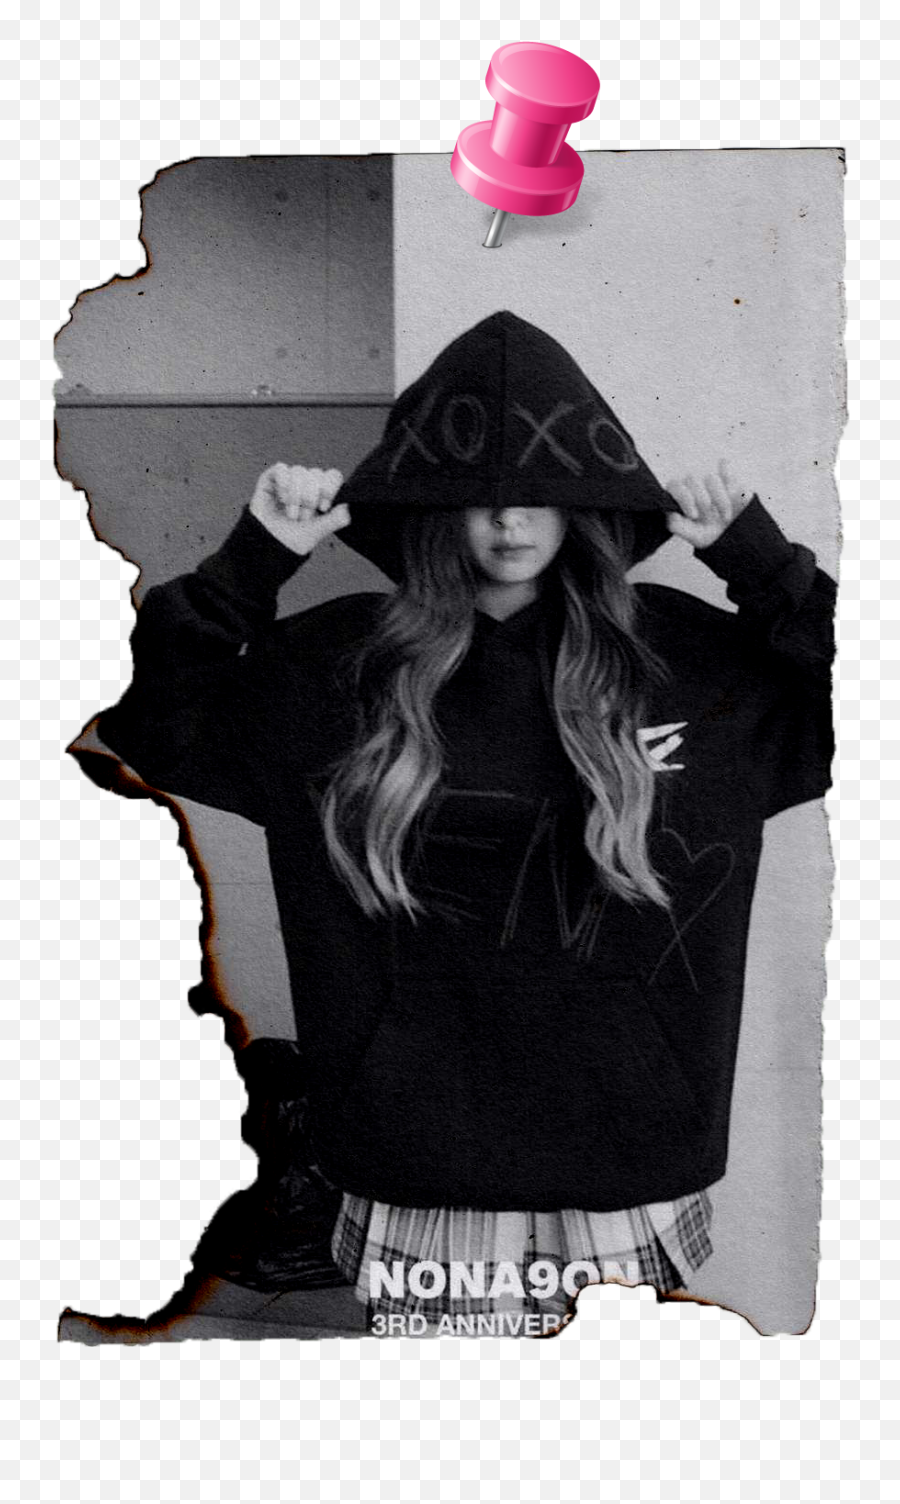 My Dumb Wife - Jenlisa Chapter 10 Wattpad Jennie With Black Hoodie Emoji,What Does The Big Toothy Smiley Emoticon Mean